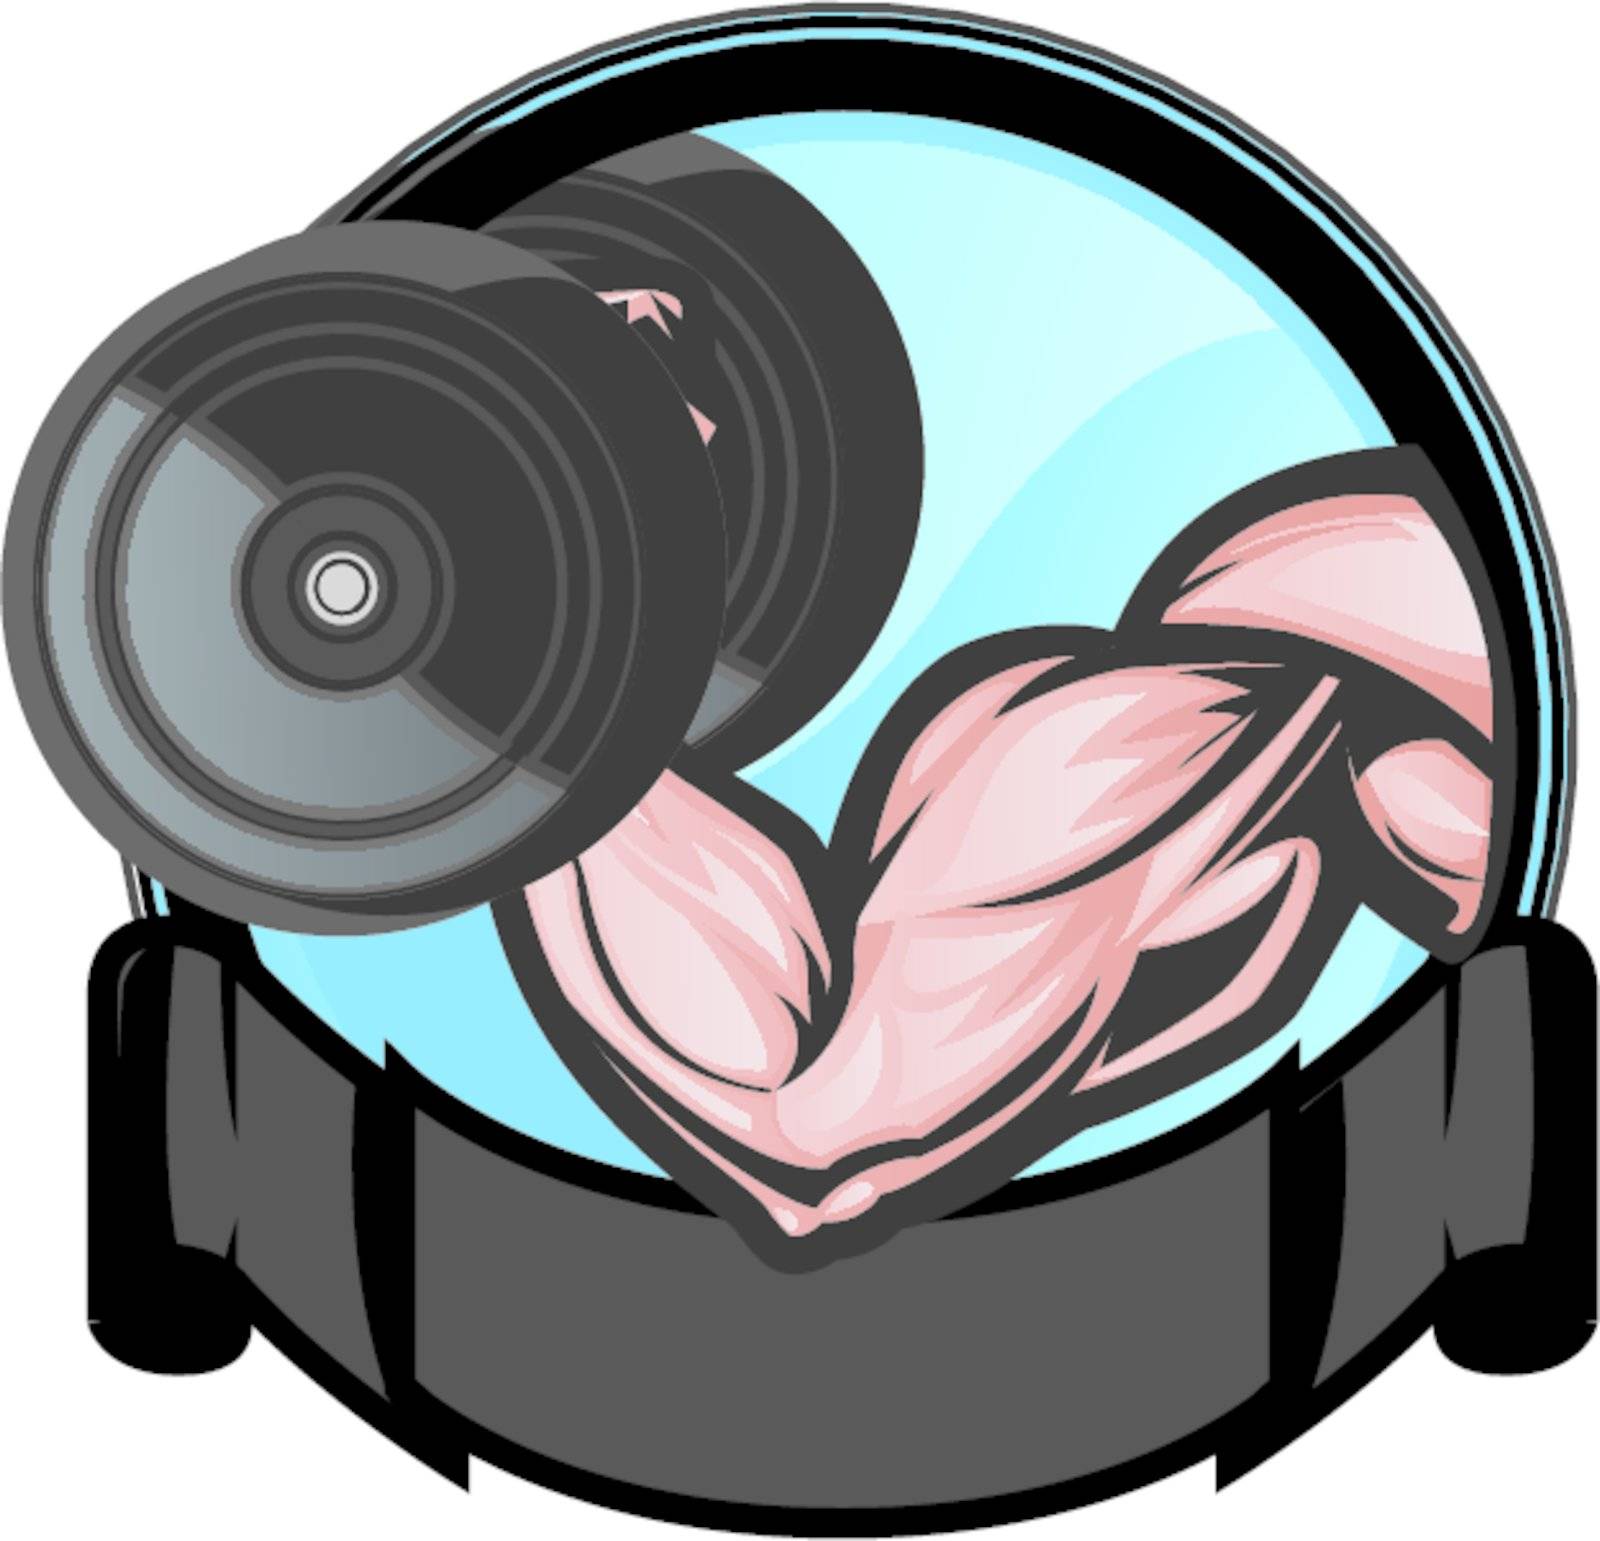 Muscular bicep flexing/performing arm curl. The arm and dumbell are on separate layers as are the background elements.